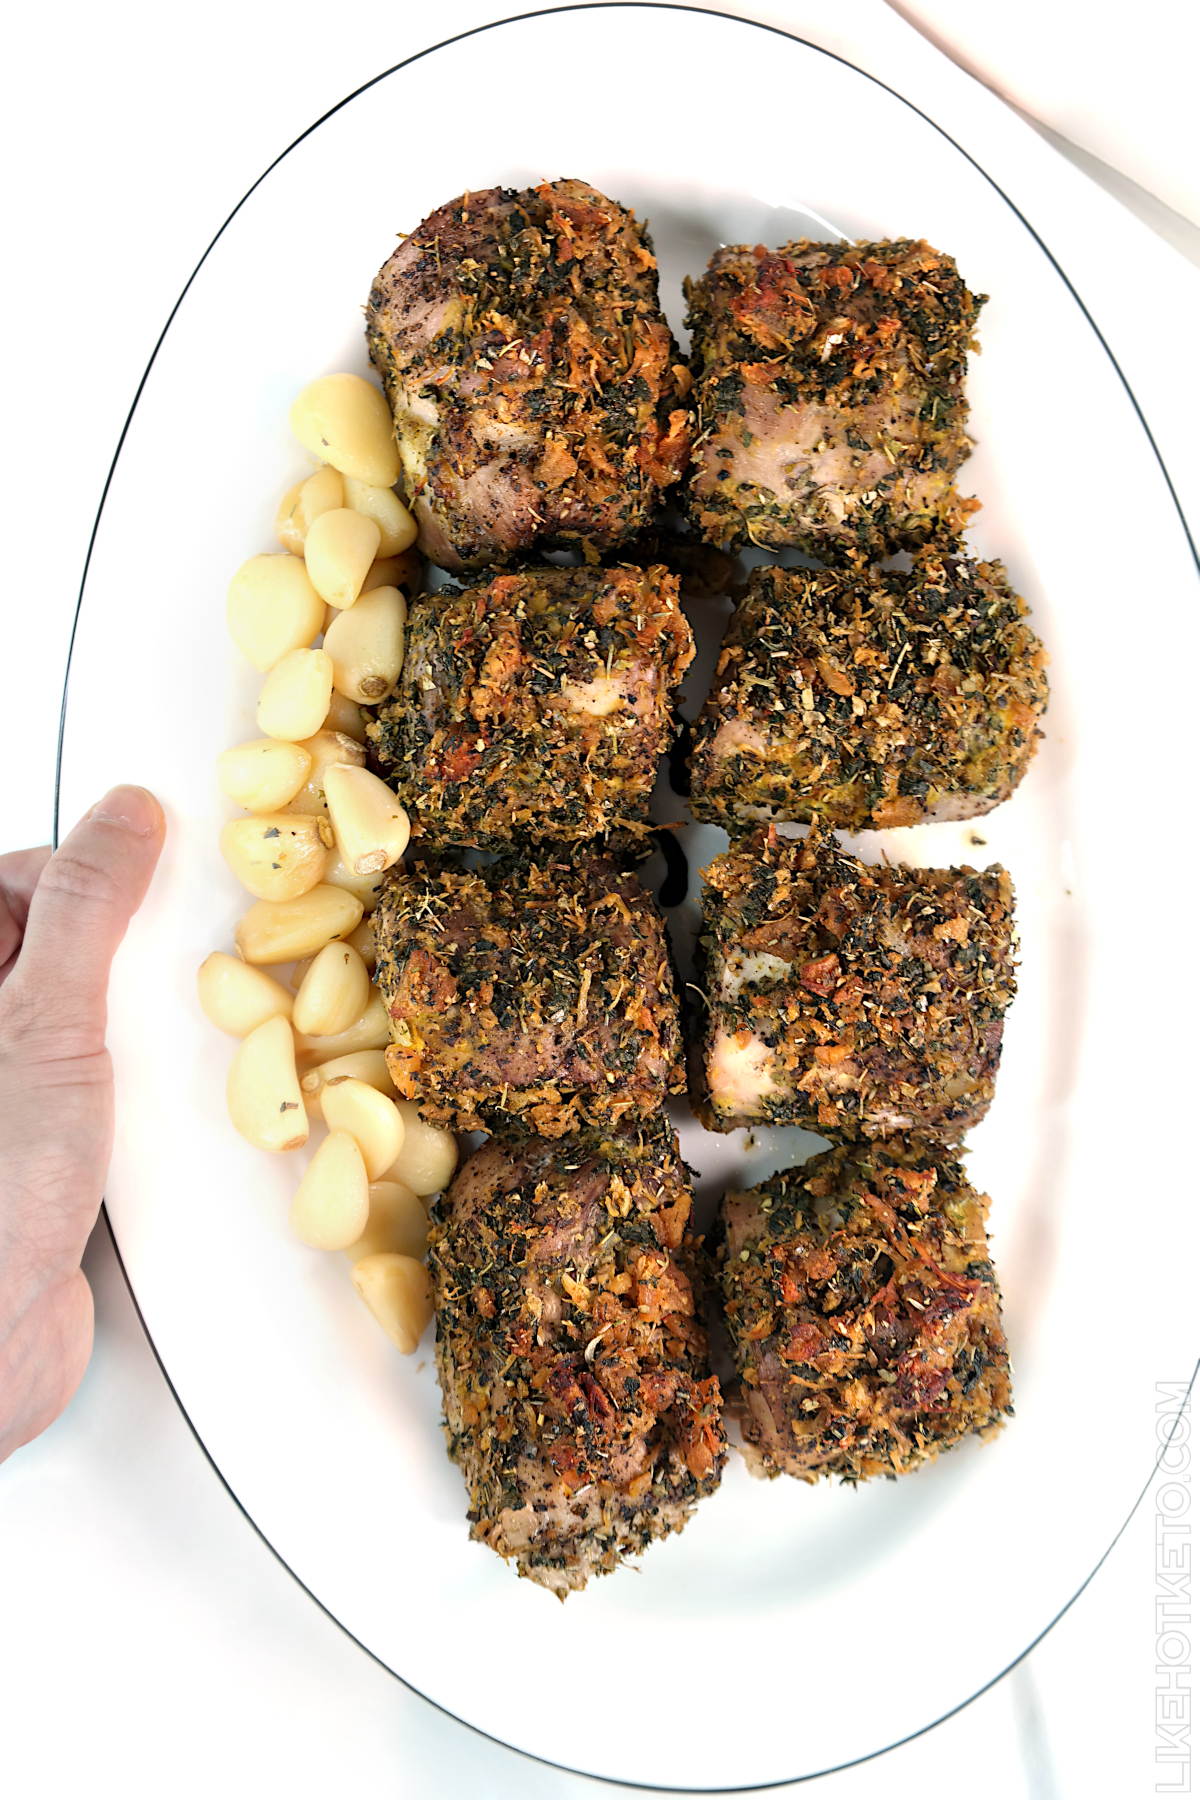 Seasoned roasted pork pieces on a serving plate with thyme, mint and oregano herb crust.